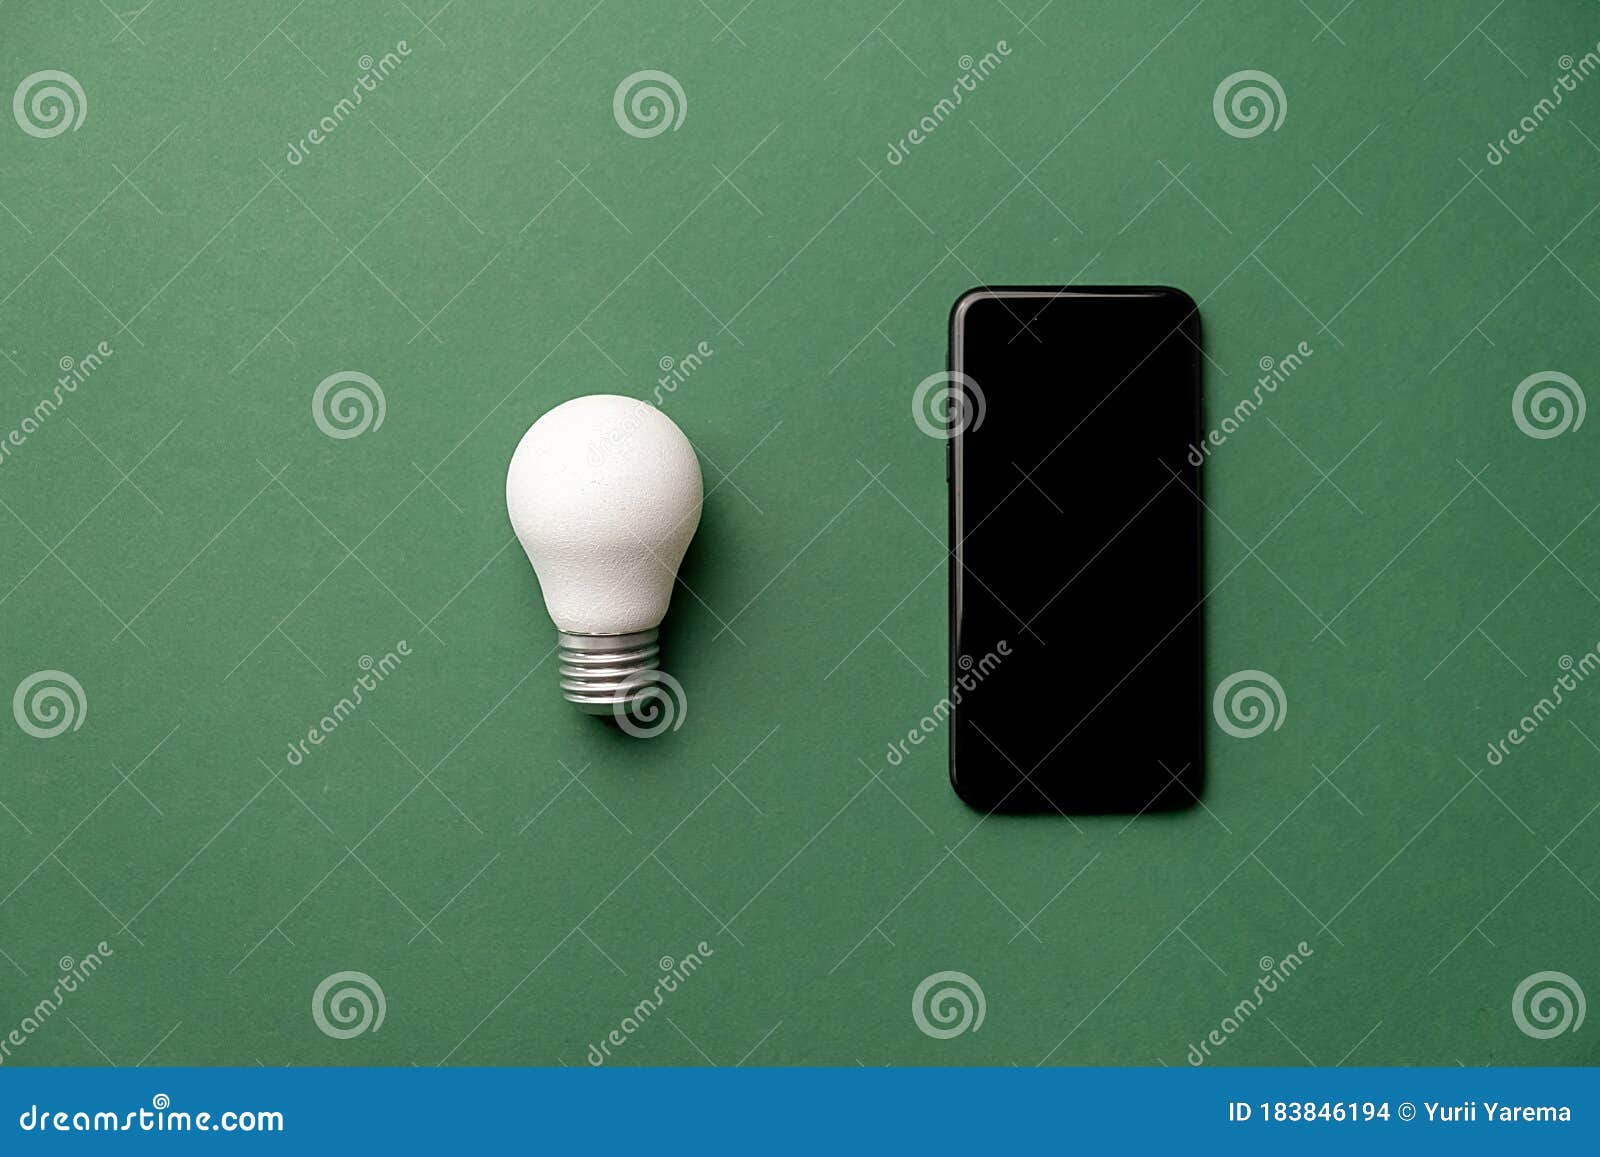 Download Creative Top View Flat Lay Of LED Light Bulb And Modern ...